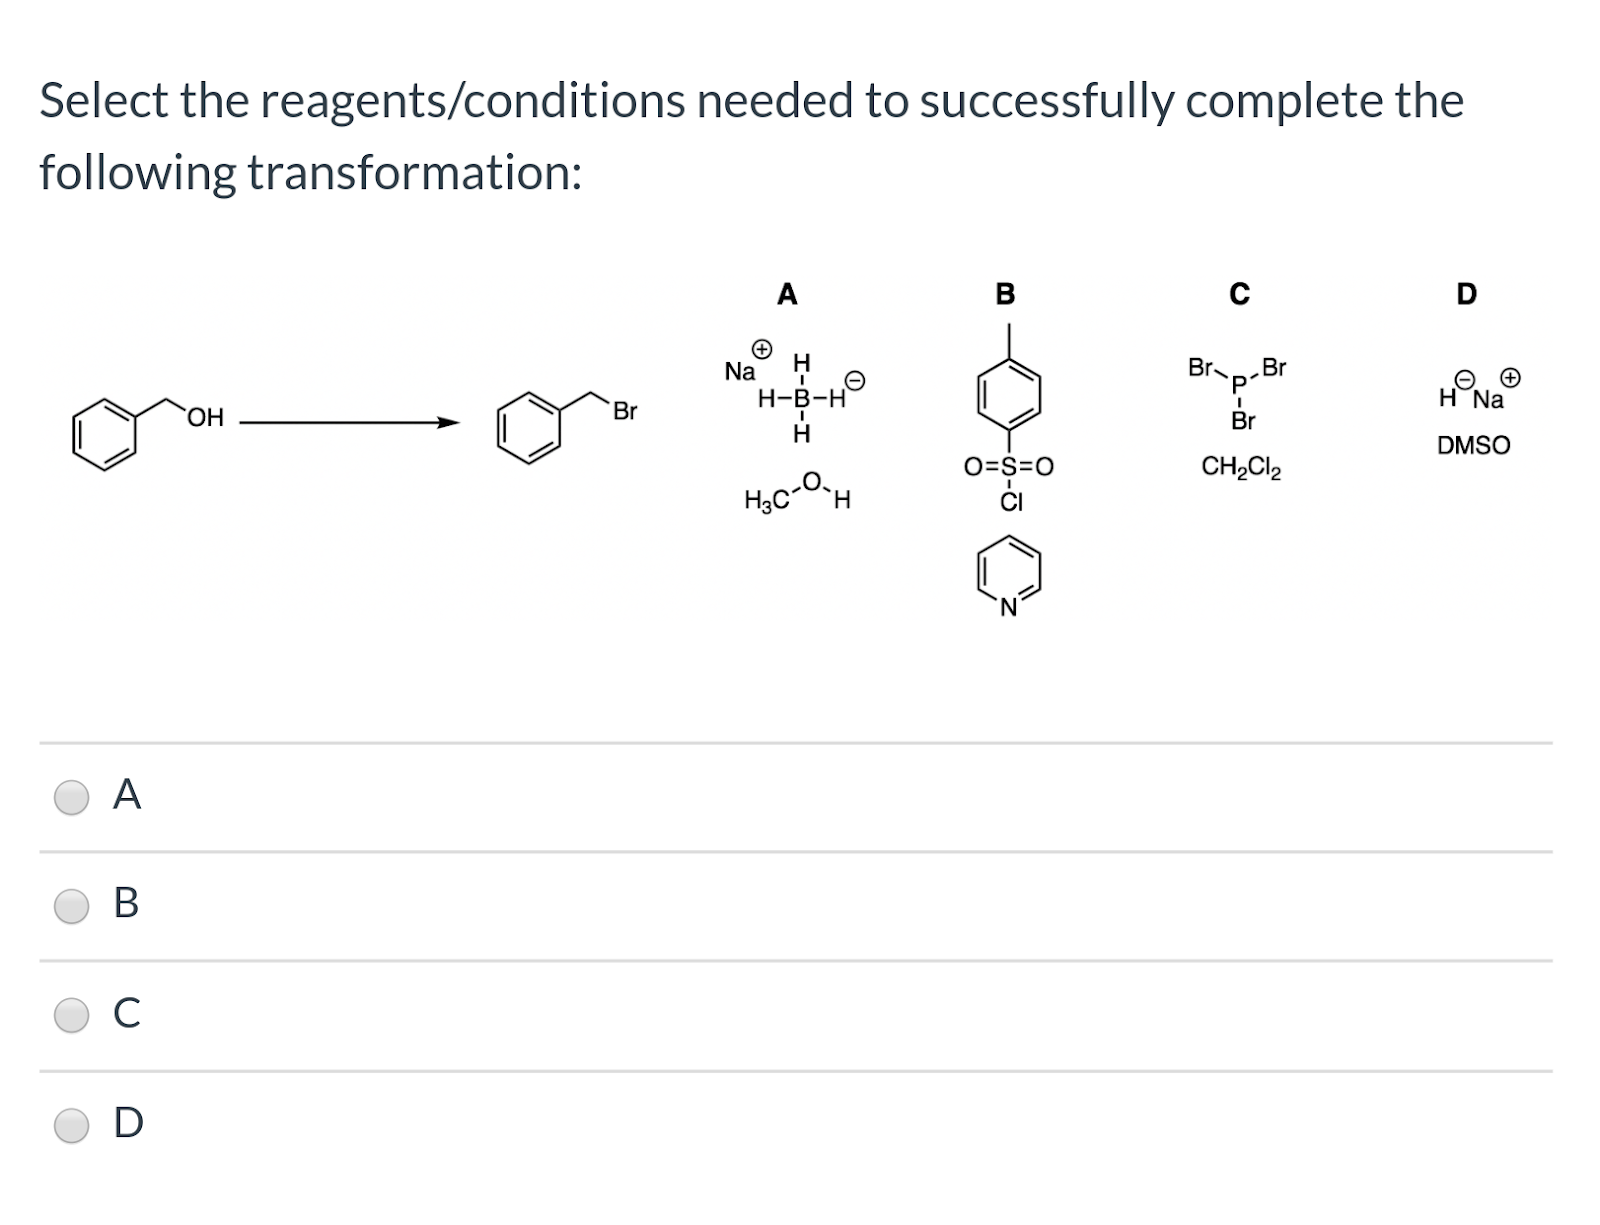 Select the reagents/conditions needed to successfully complete the following transformation: Bro-Br HONGO Br orano Br • 0 0 0